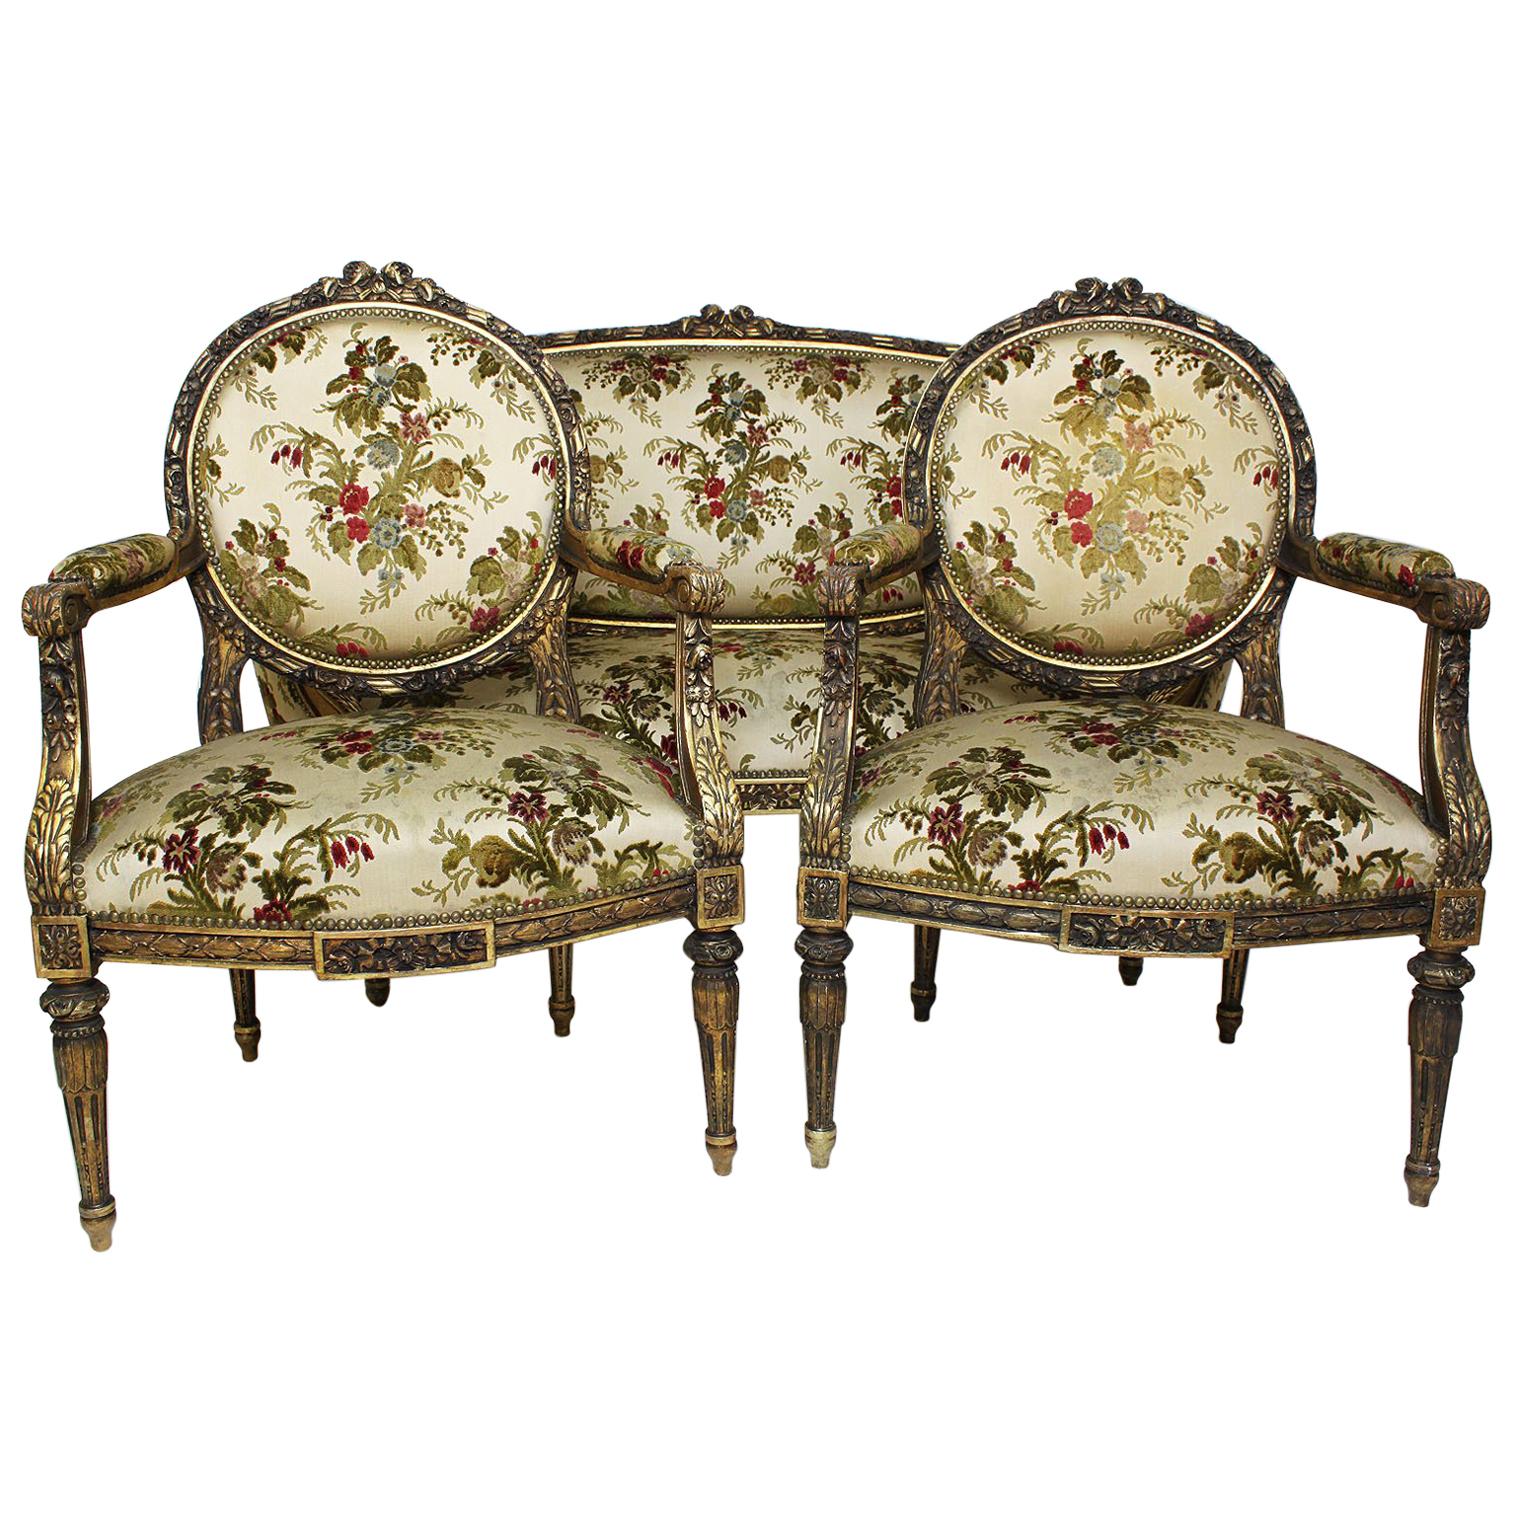 French 19th-20th Century Louis XVI Style Giltwood Carved 3-Piece Salon Suite For Sale